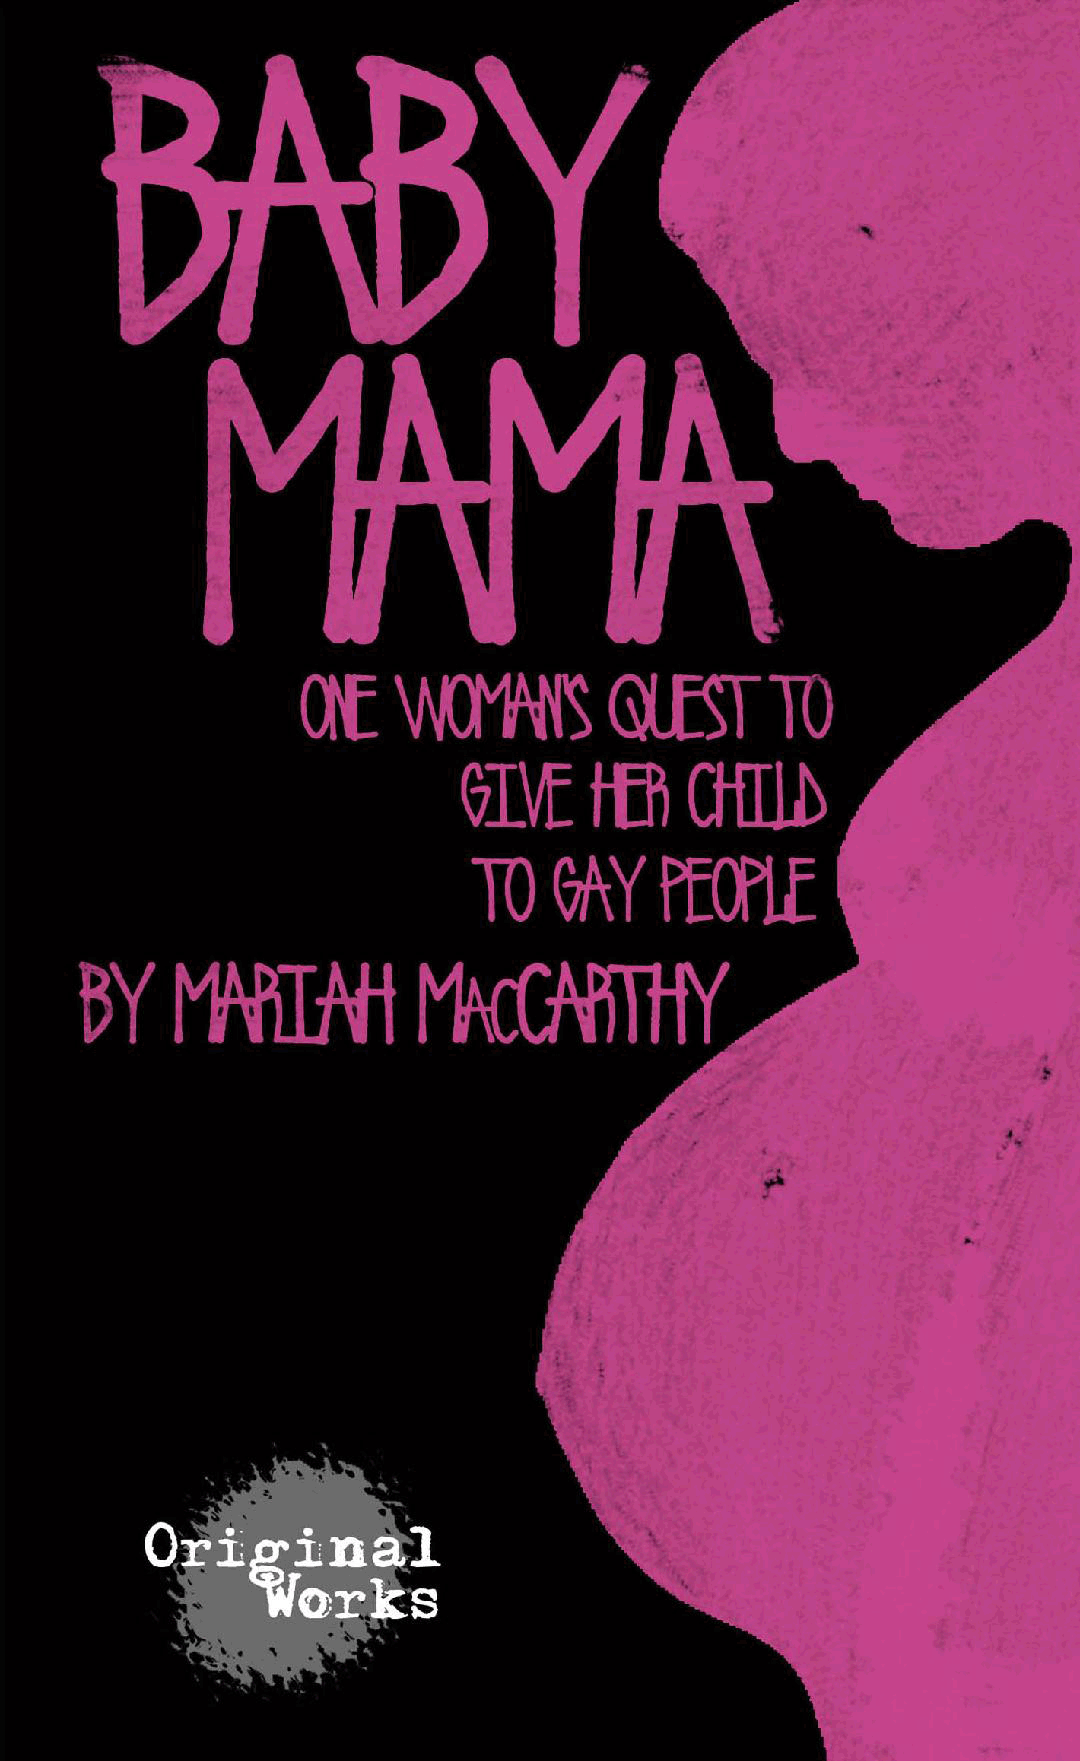 Baby Mama: One Woman's Quest To Give Her Child To Gay People